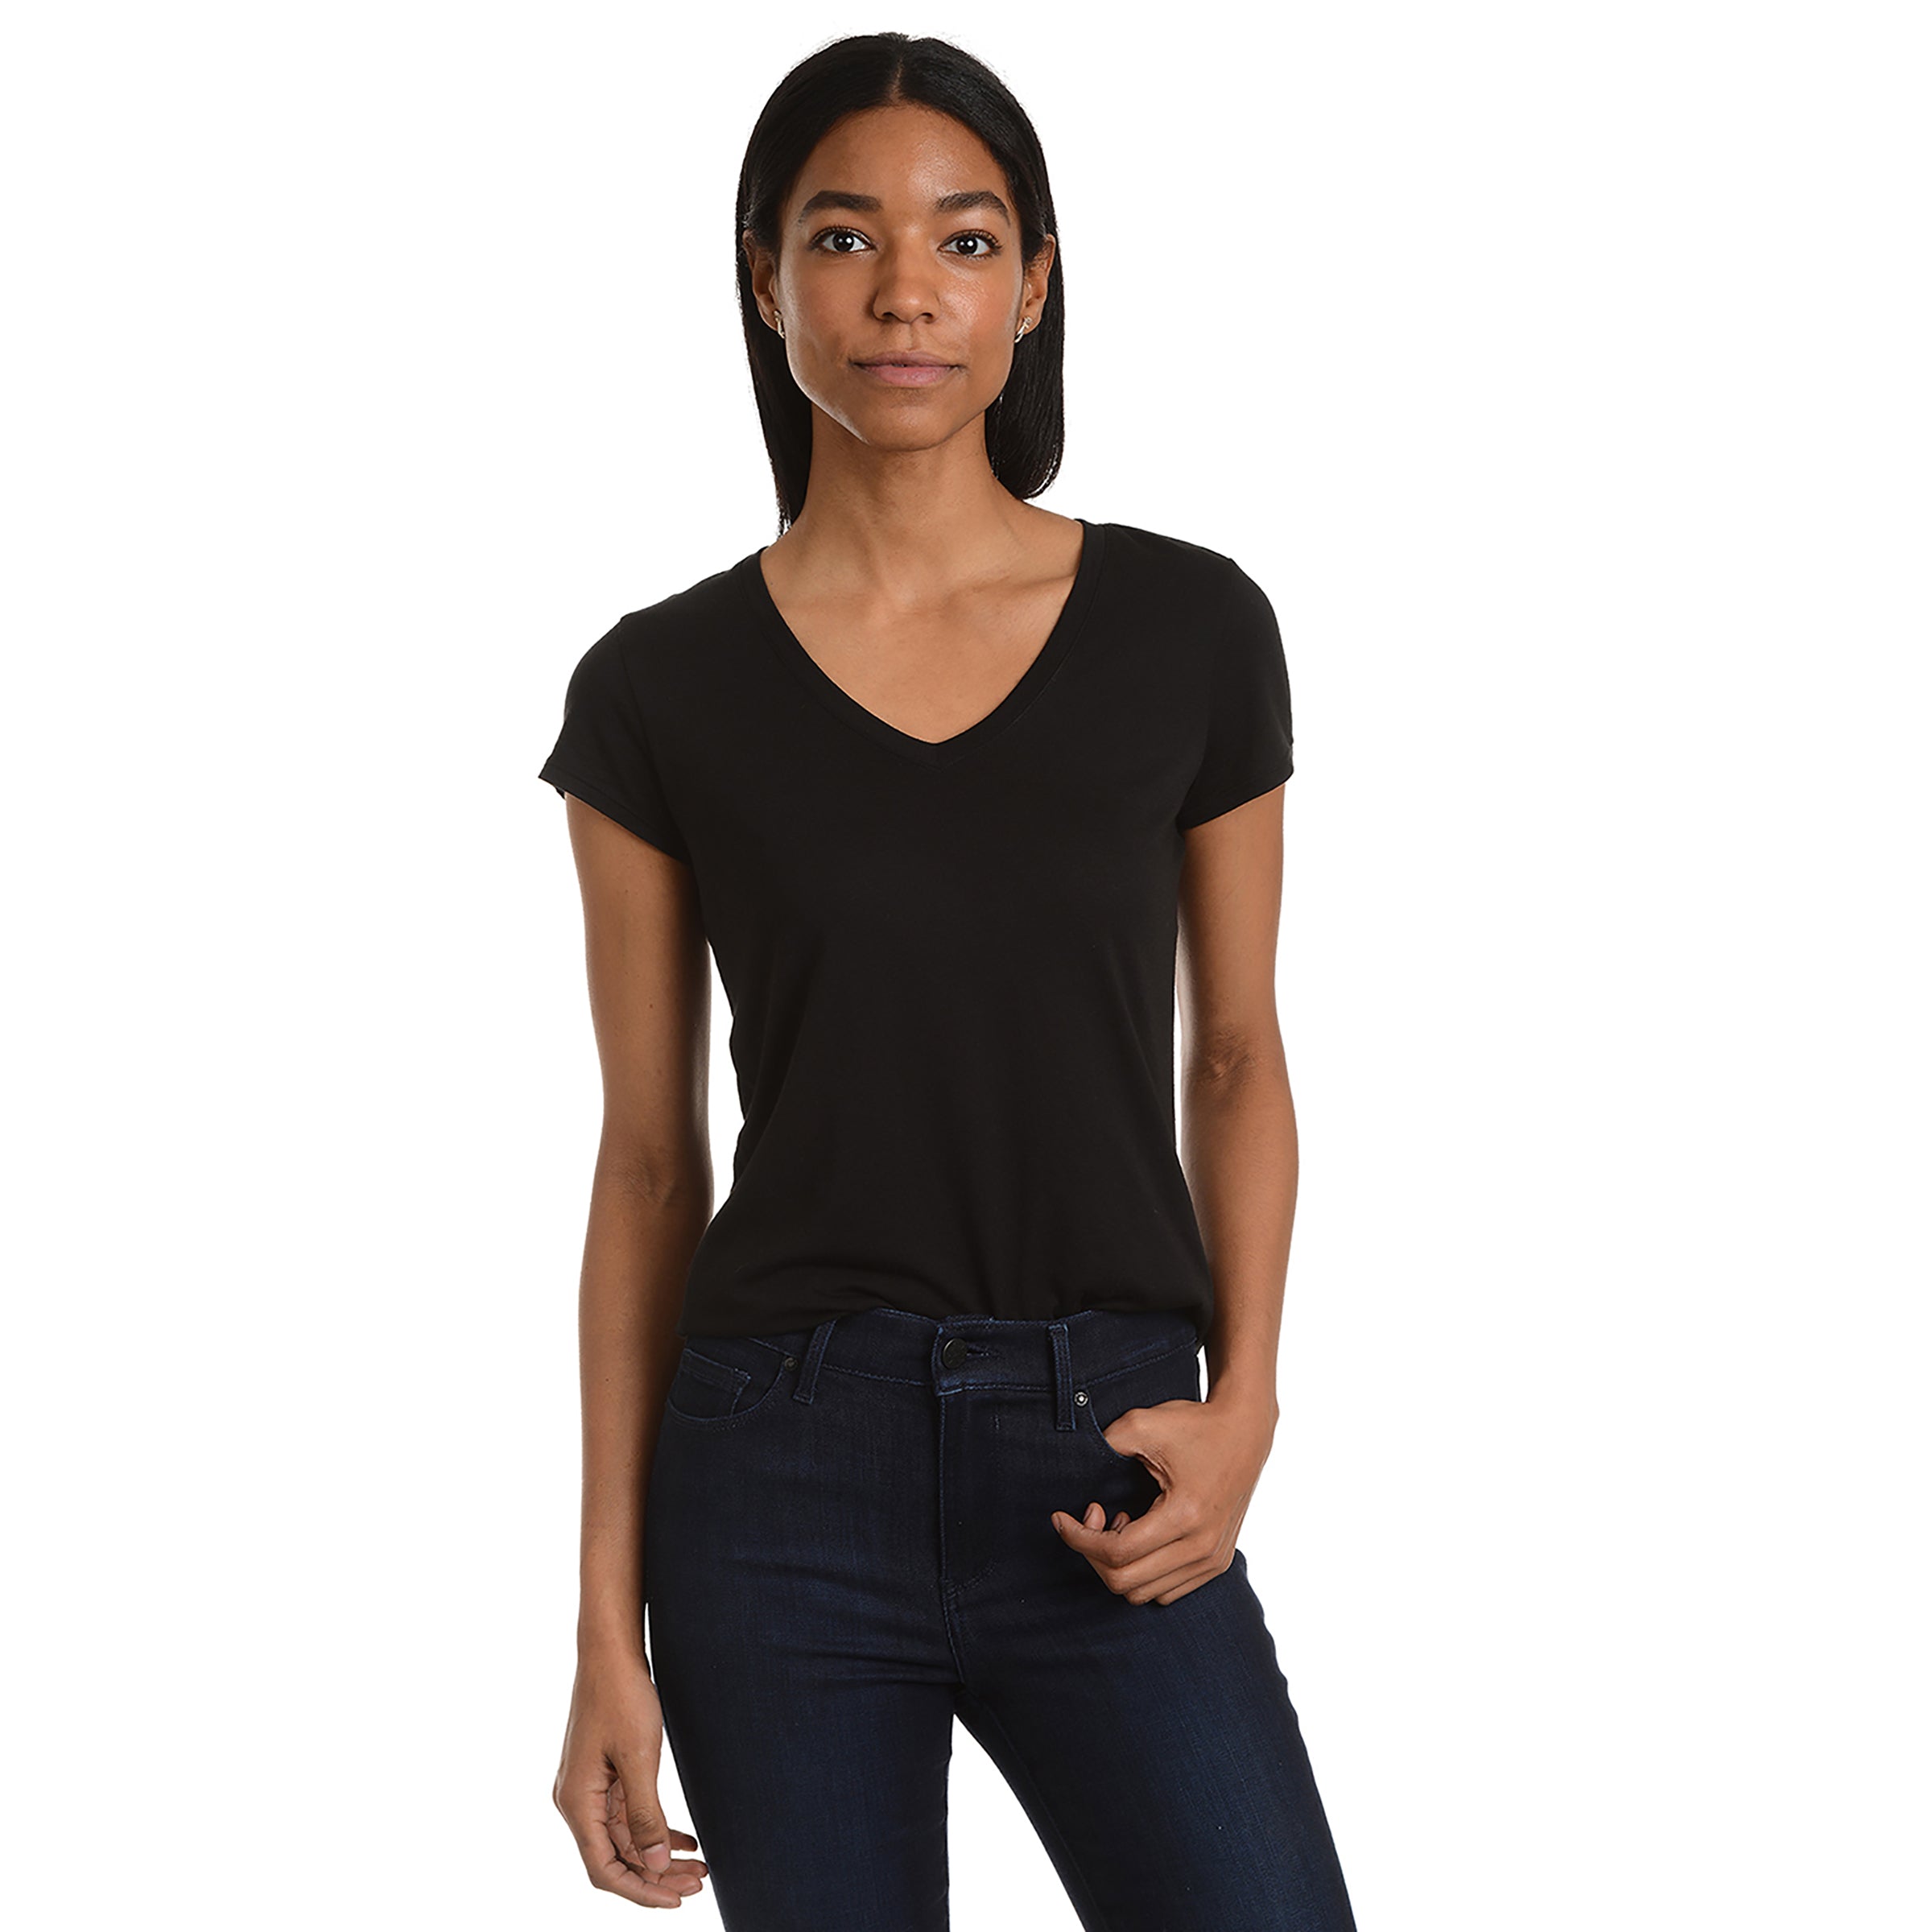 Women wearing Noir Fitted V-Neck Marcy Tee